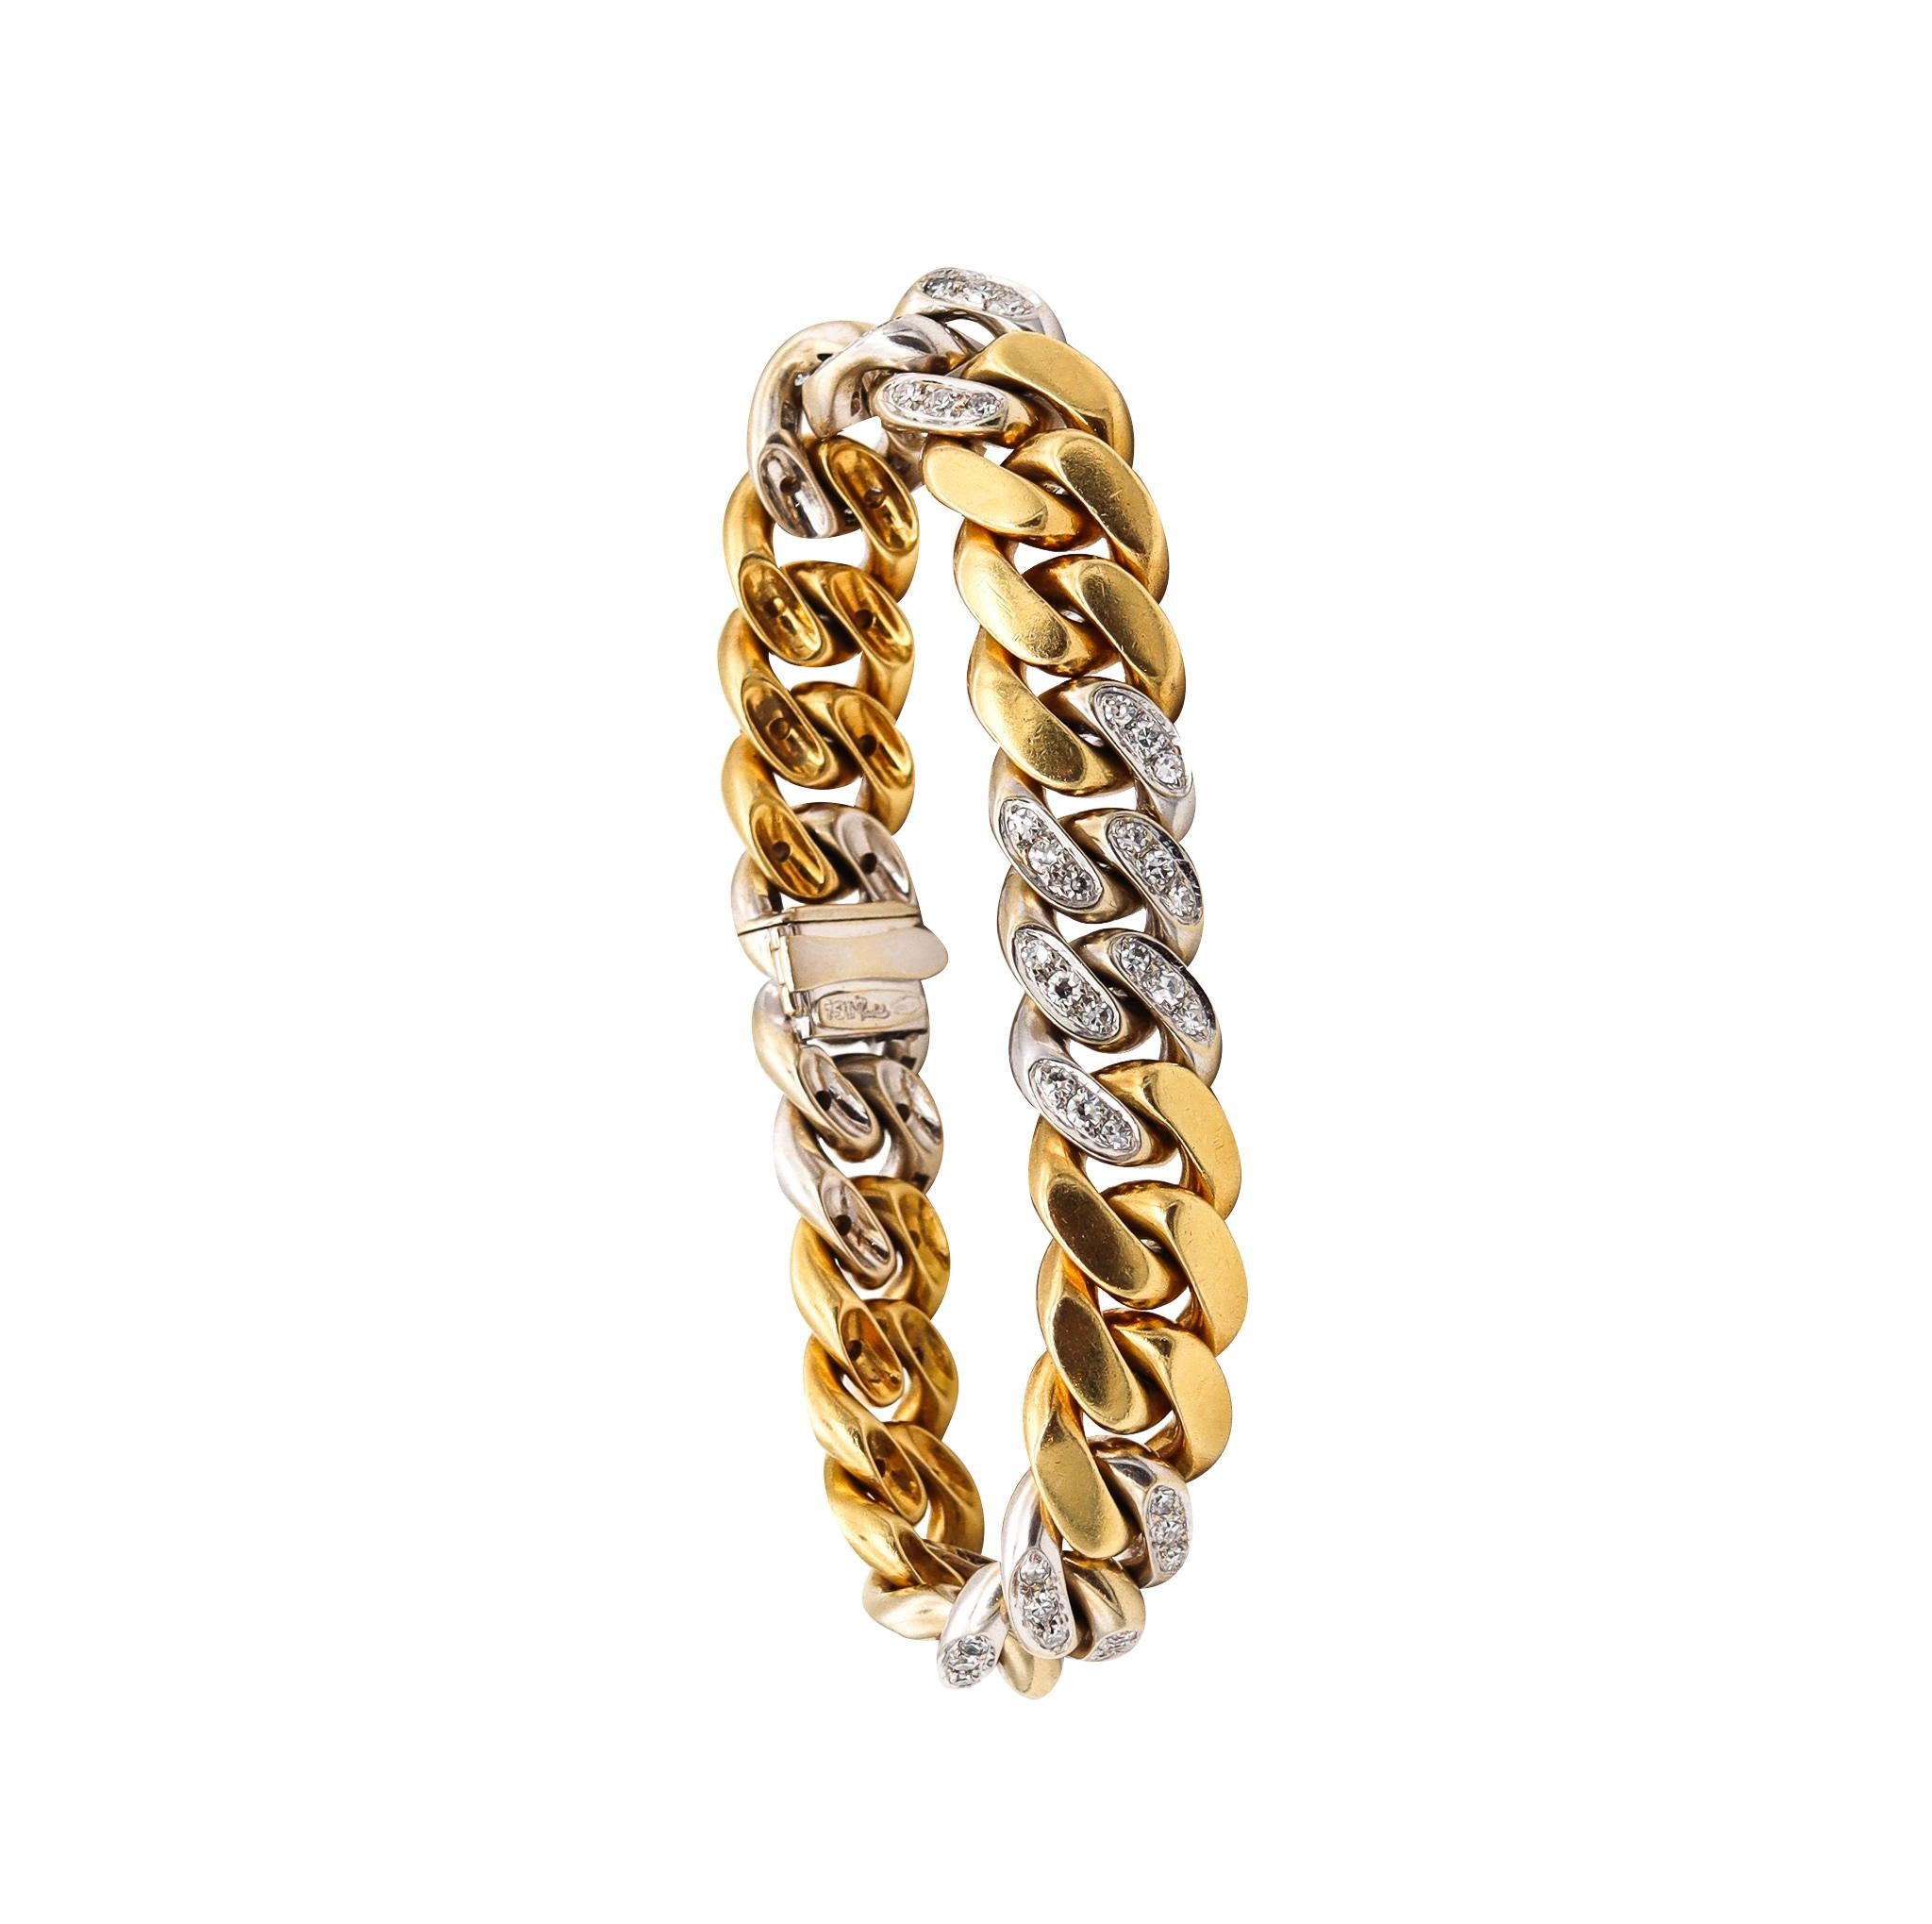 Cuban-Links Bracelet designed by Pomellato.

Beautiful bold bracelet, created in Milano Italy by the jewelry house of Pomellato. This Cuban-links bracelet was crafted in solid yellow and white gold of 18 karats, with high polished finish. Suited